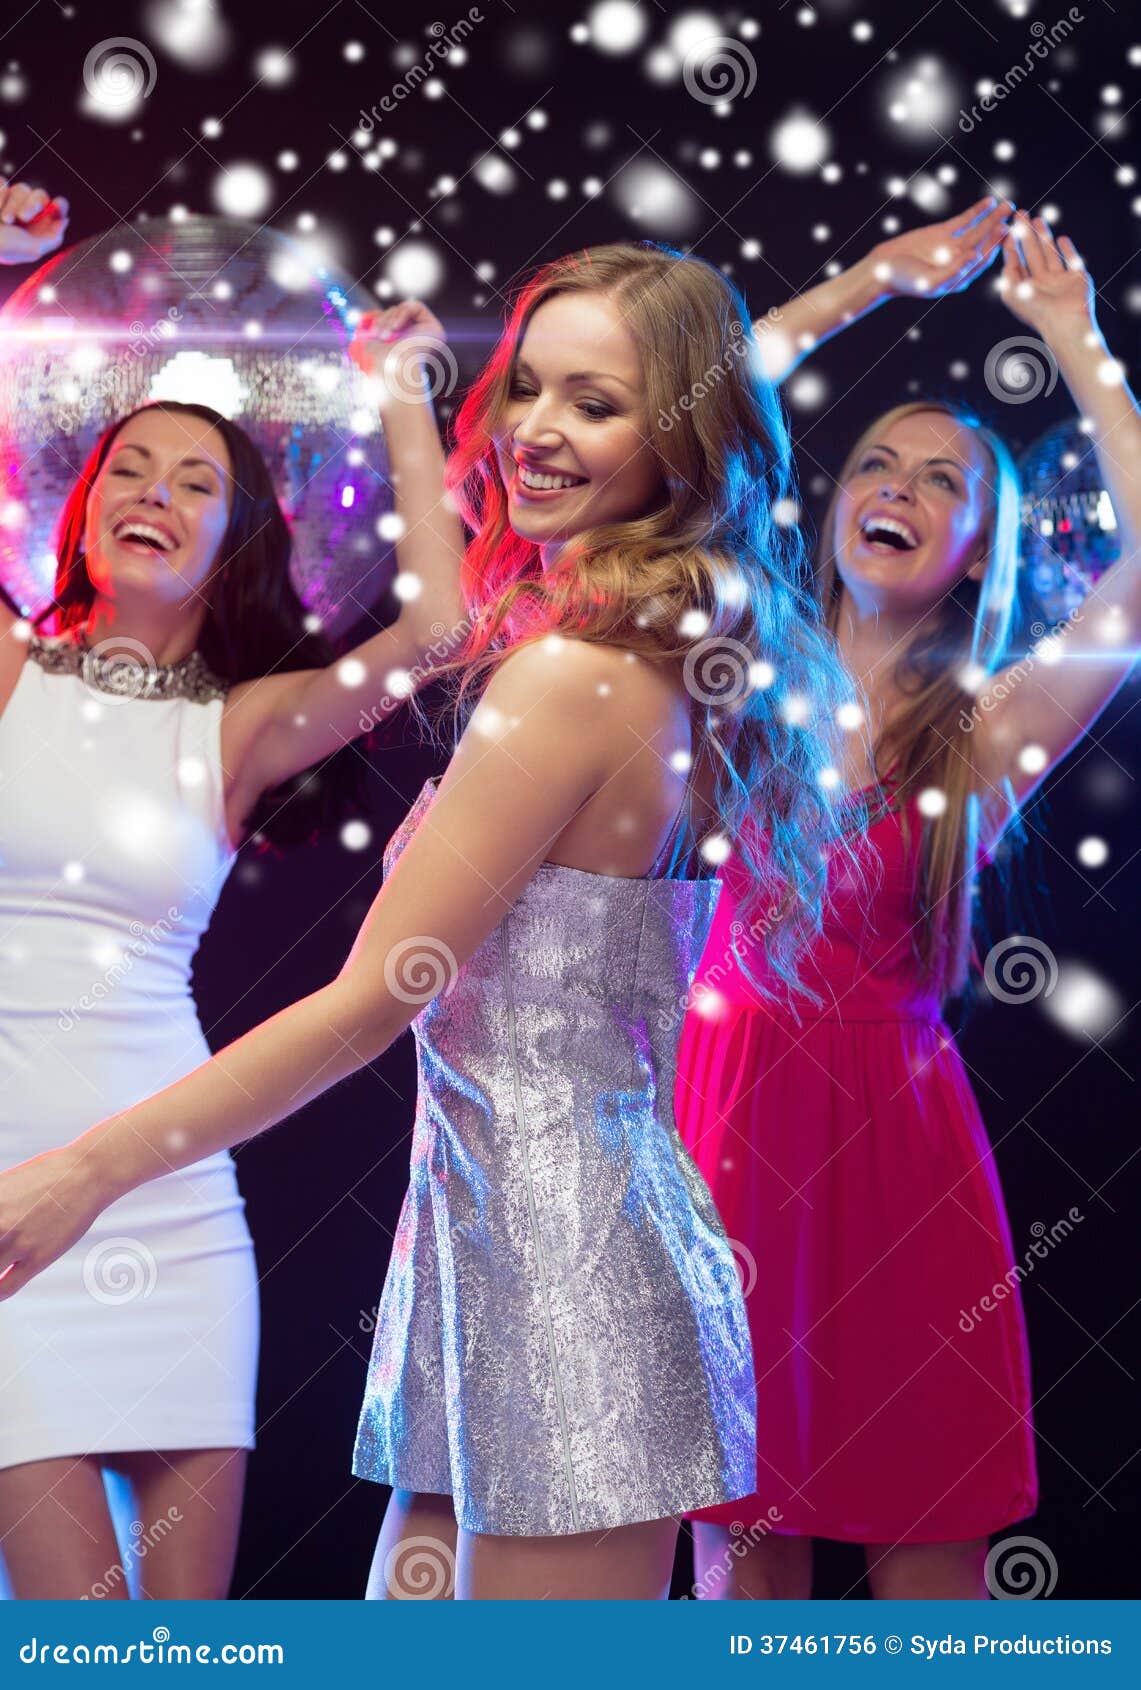 Three Smiling Women Dancing in the Club Stock Photo - Image of clubbing ...